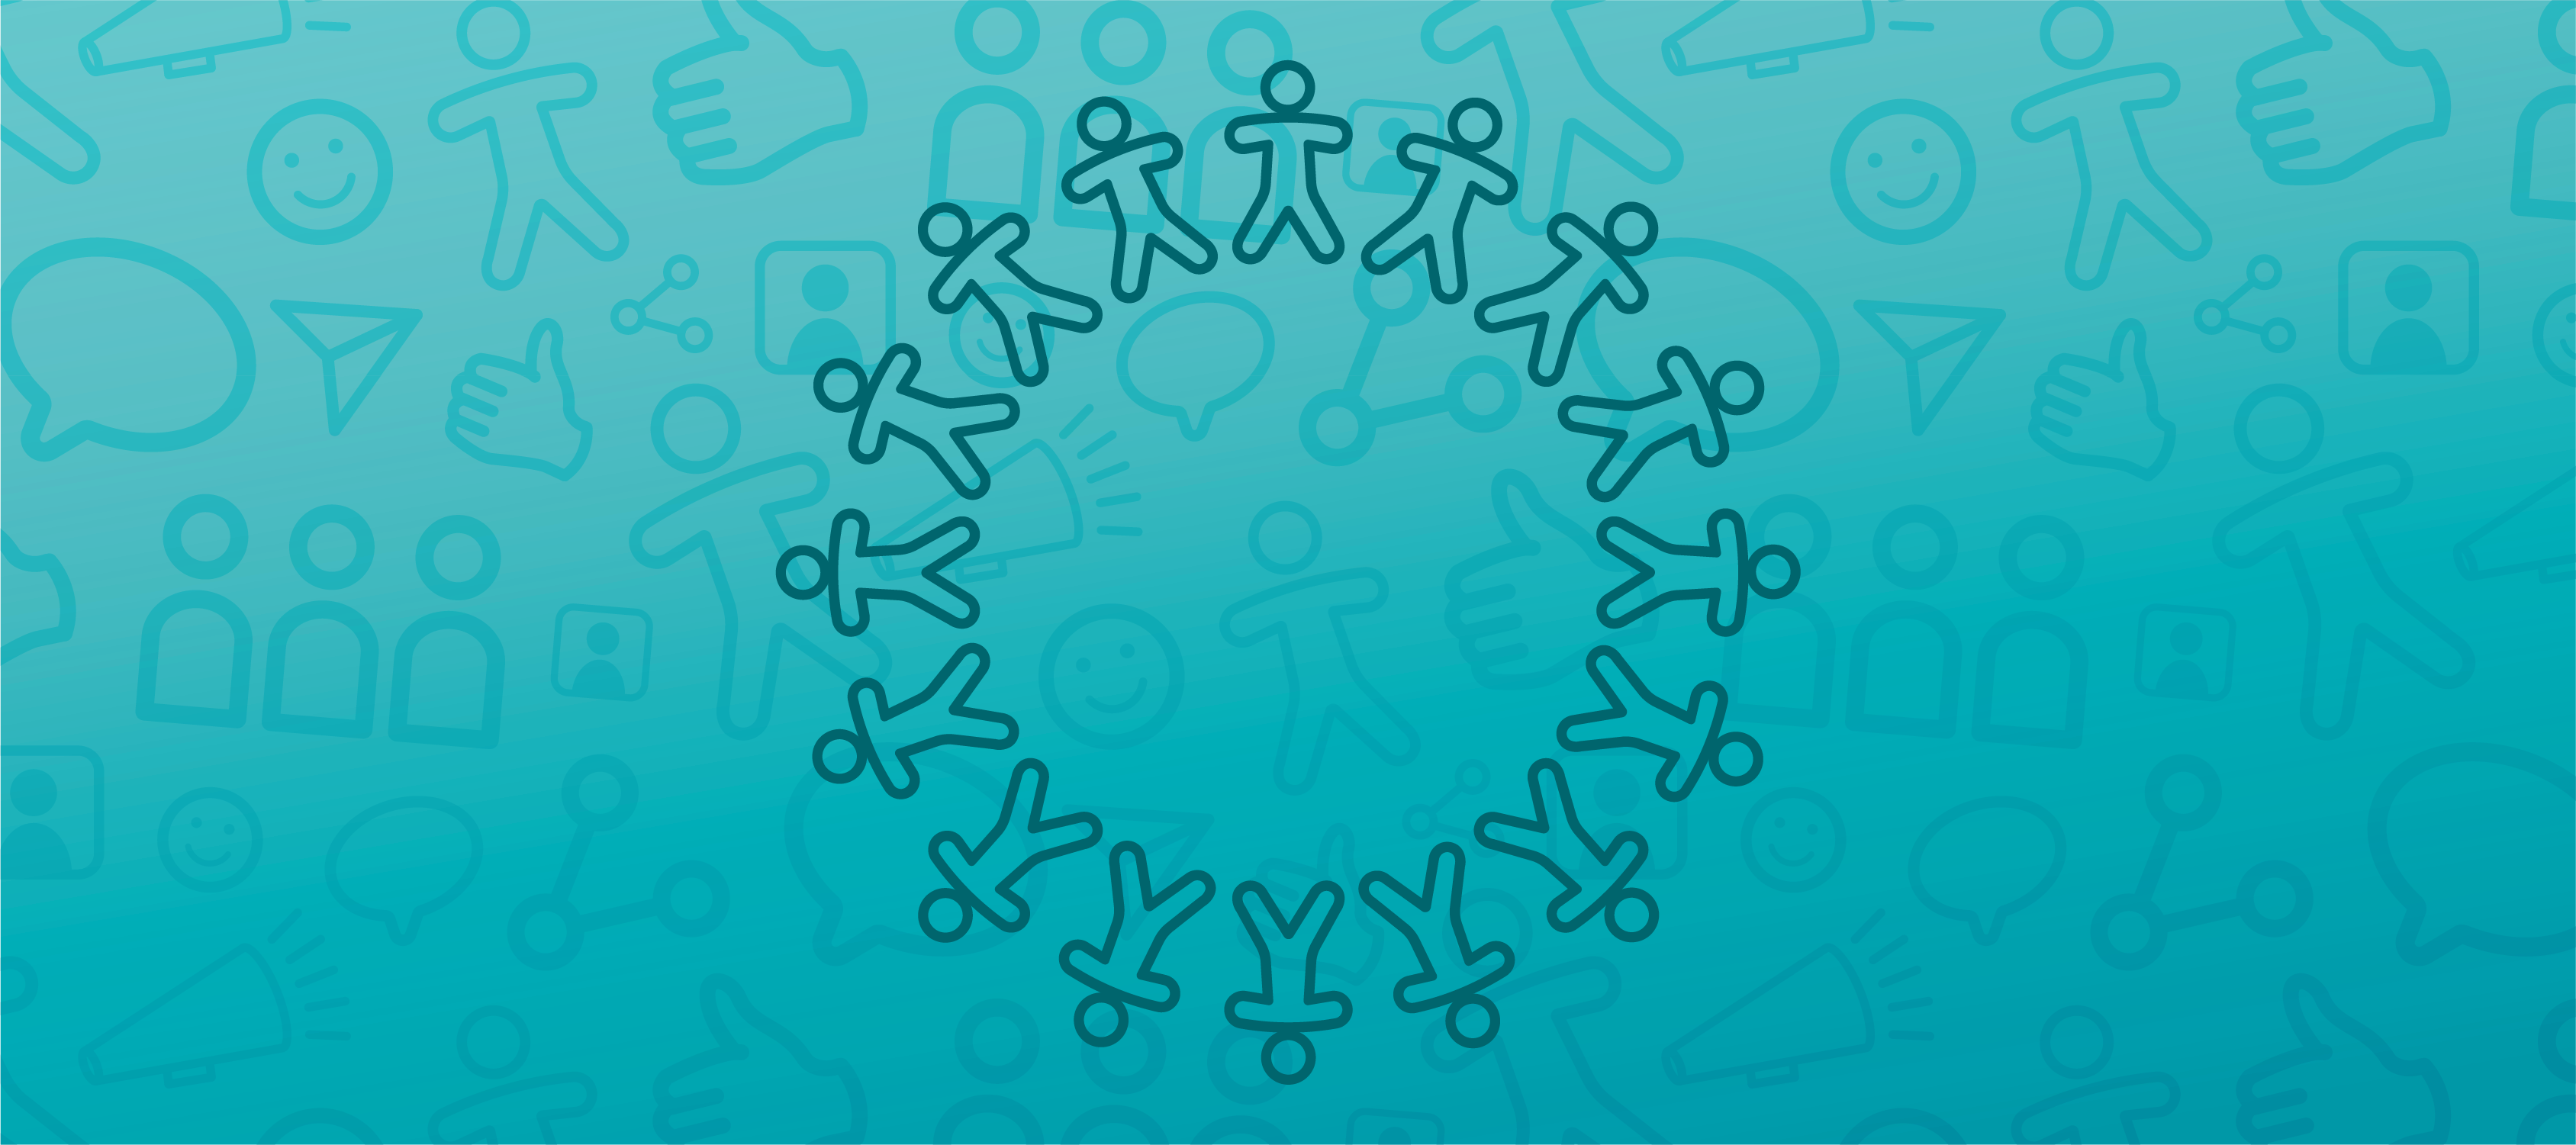 A blue header image featuring an icon of a circle of people in the center and faded marketing icons in the background